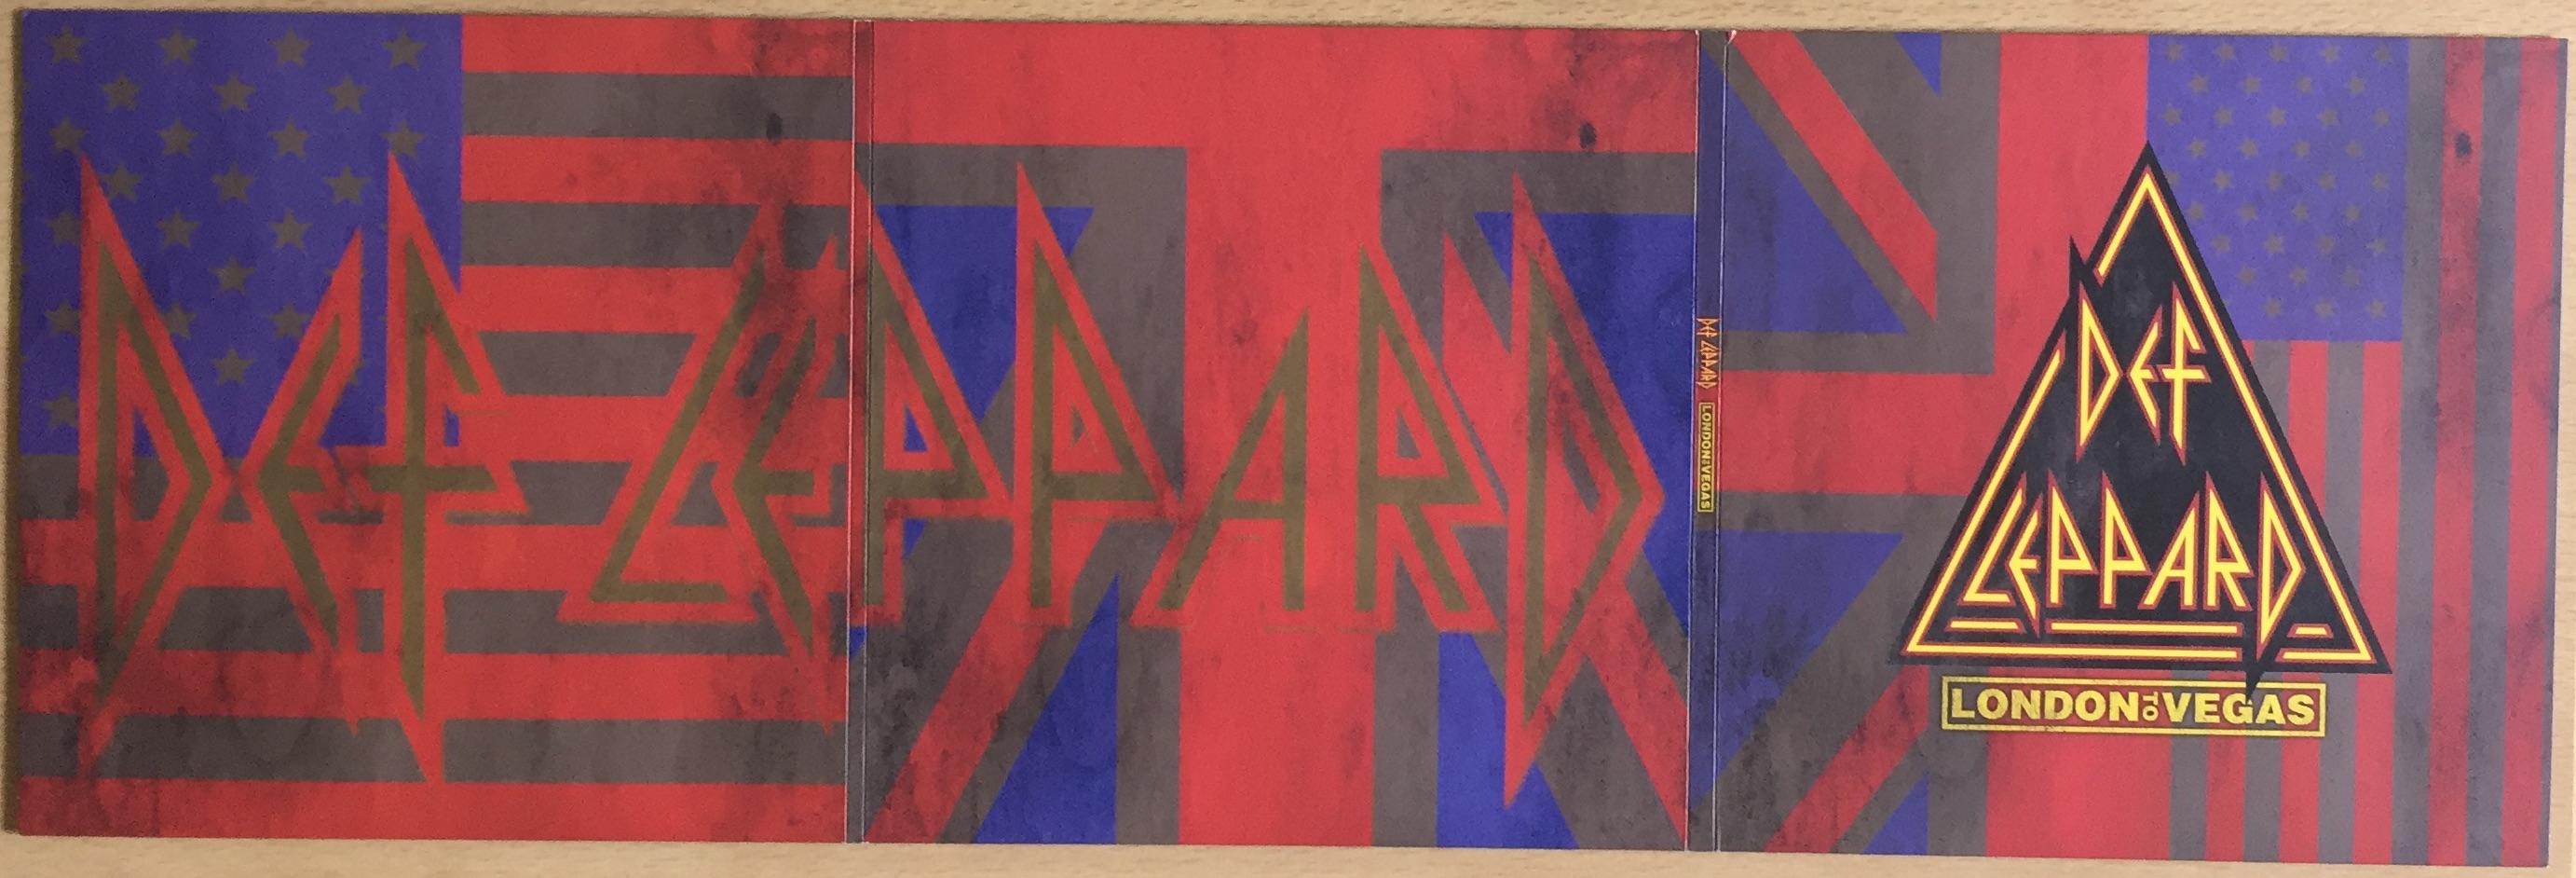 Outer side of the large 3 panel foldout sleeve from the Def Leppard London To Vegas box set. It features faded versions of the Union Jack and American flags across the background, the white areas having become grey while the reds and blues are still visible. A bit of dirt has been added to the flags as well. Across the left 2 panels, the Def Leppard logo spreads all the way across in large faded letters that are difficult to see. The far right panel, which forms the front of the sleeve when folded, as the Def Leppard logo in its more traditional clear form, inside the yellow and red edged triangle, with London To Vegas written beneath.